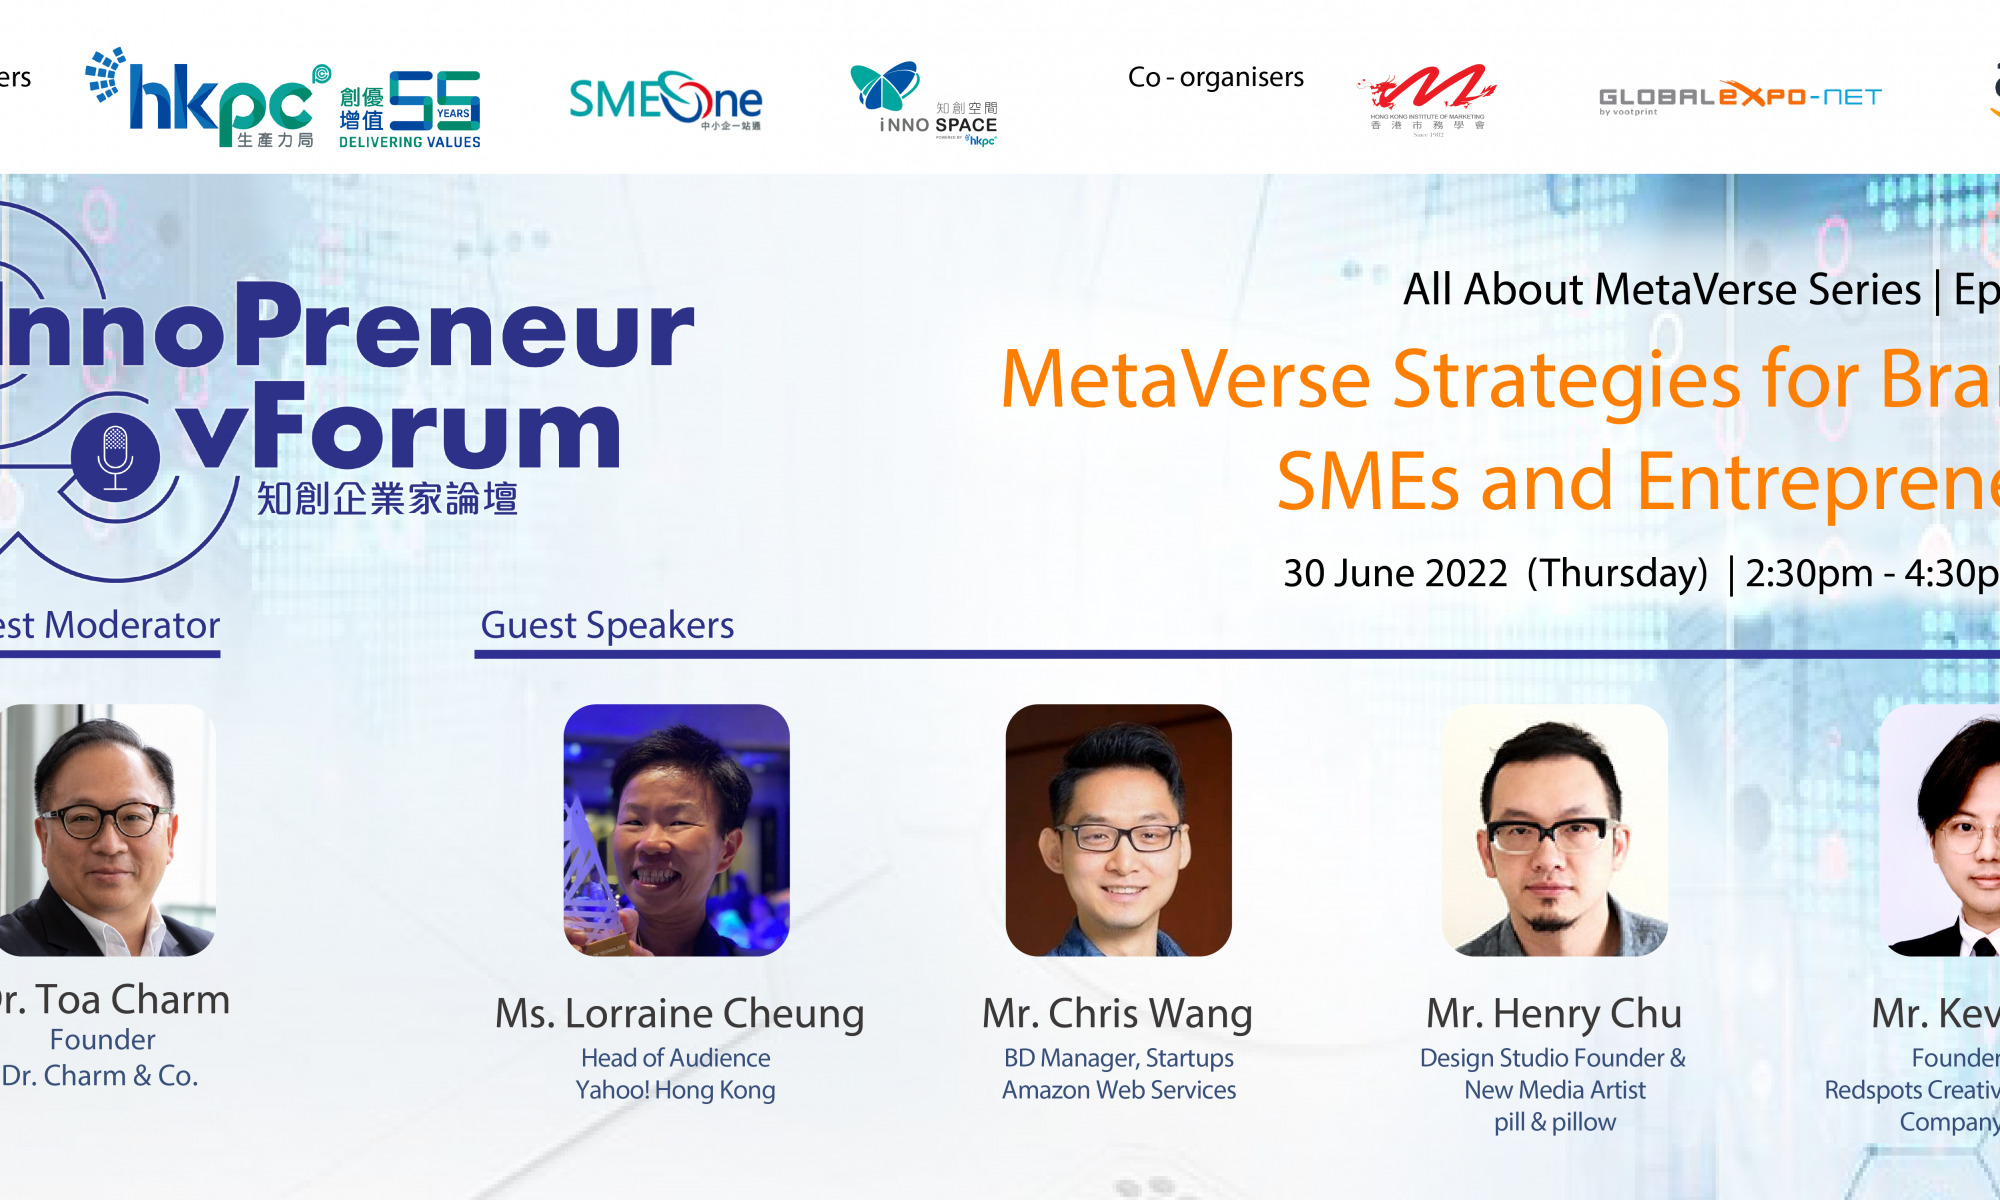 MetaVerse Strategies for Brands, SMEs and Entrepreneurs